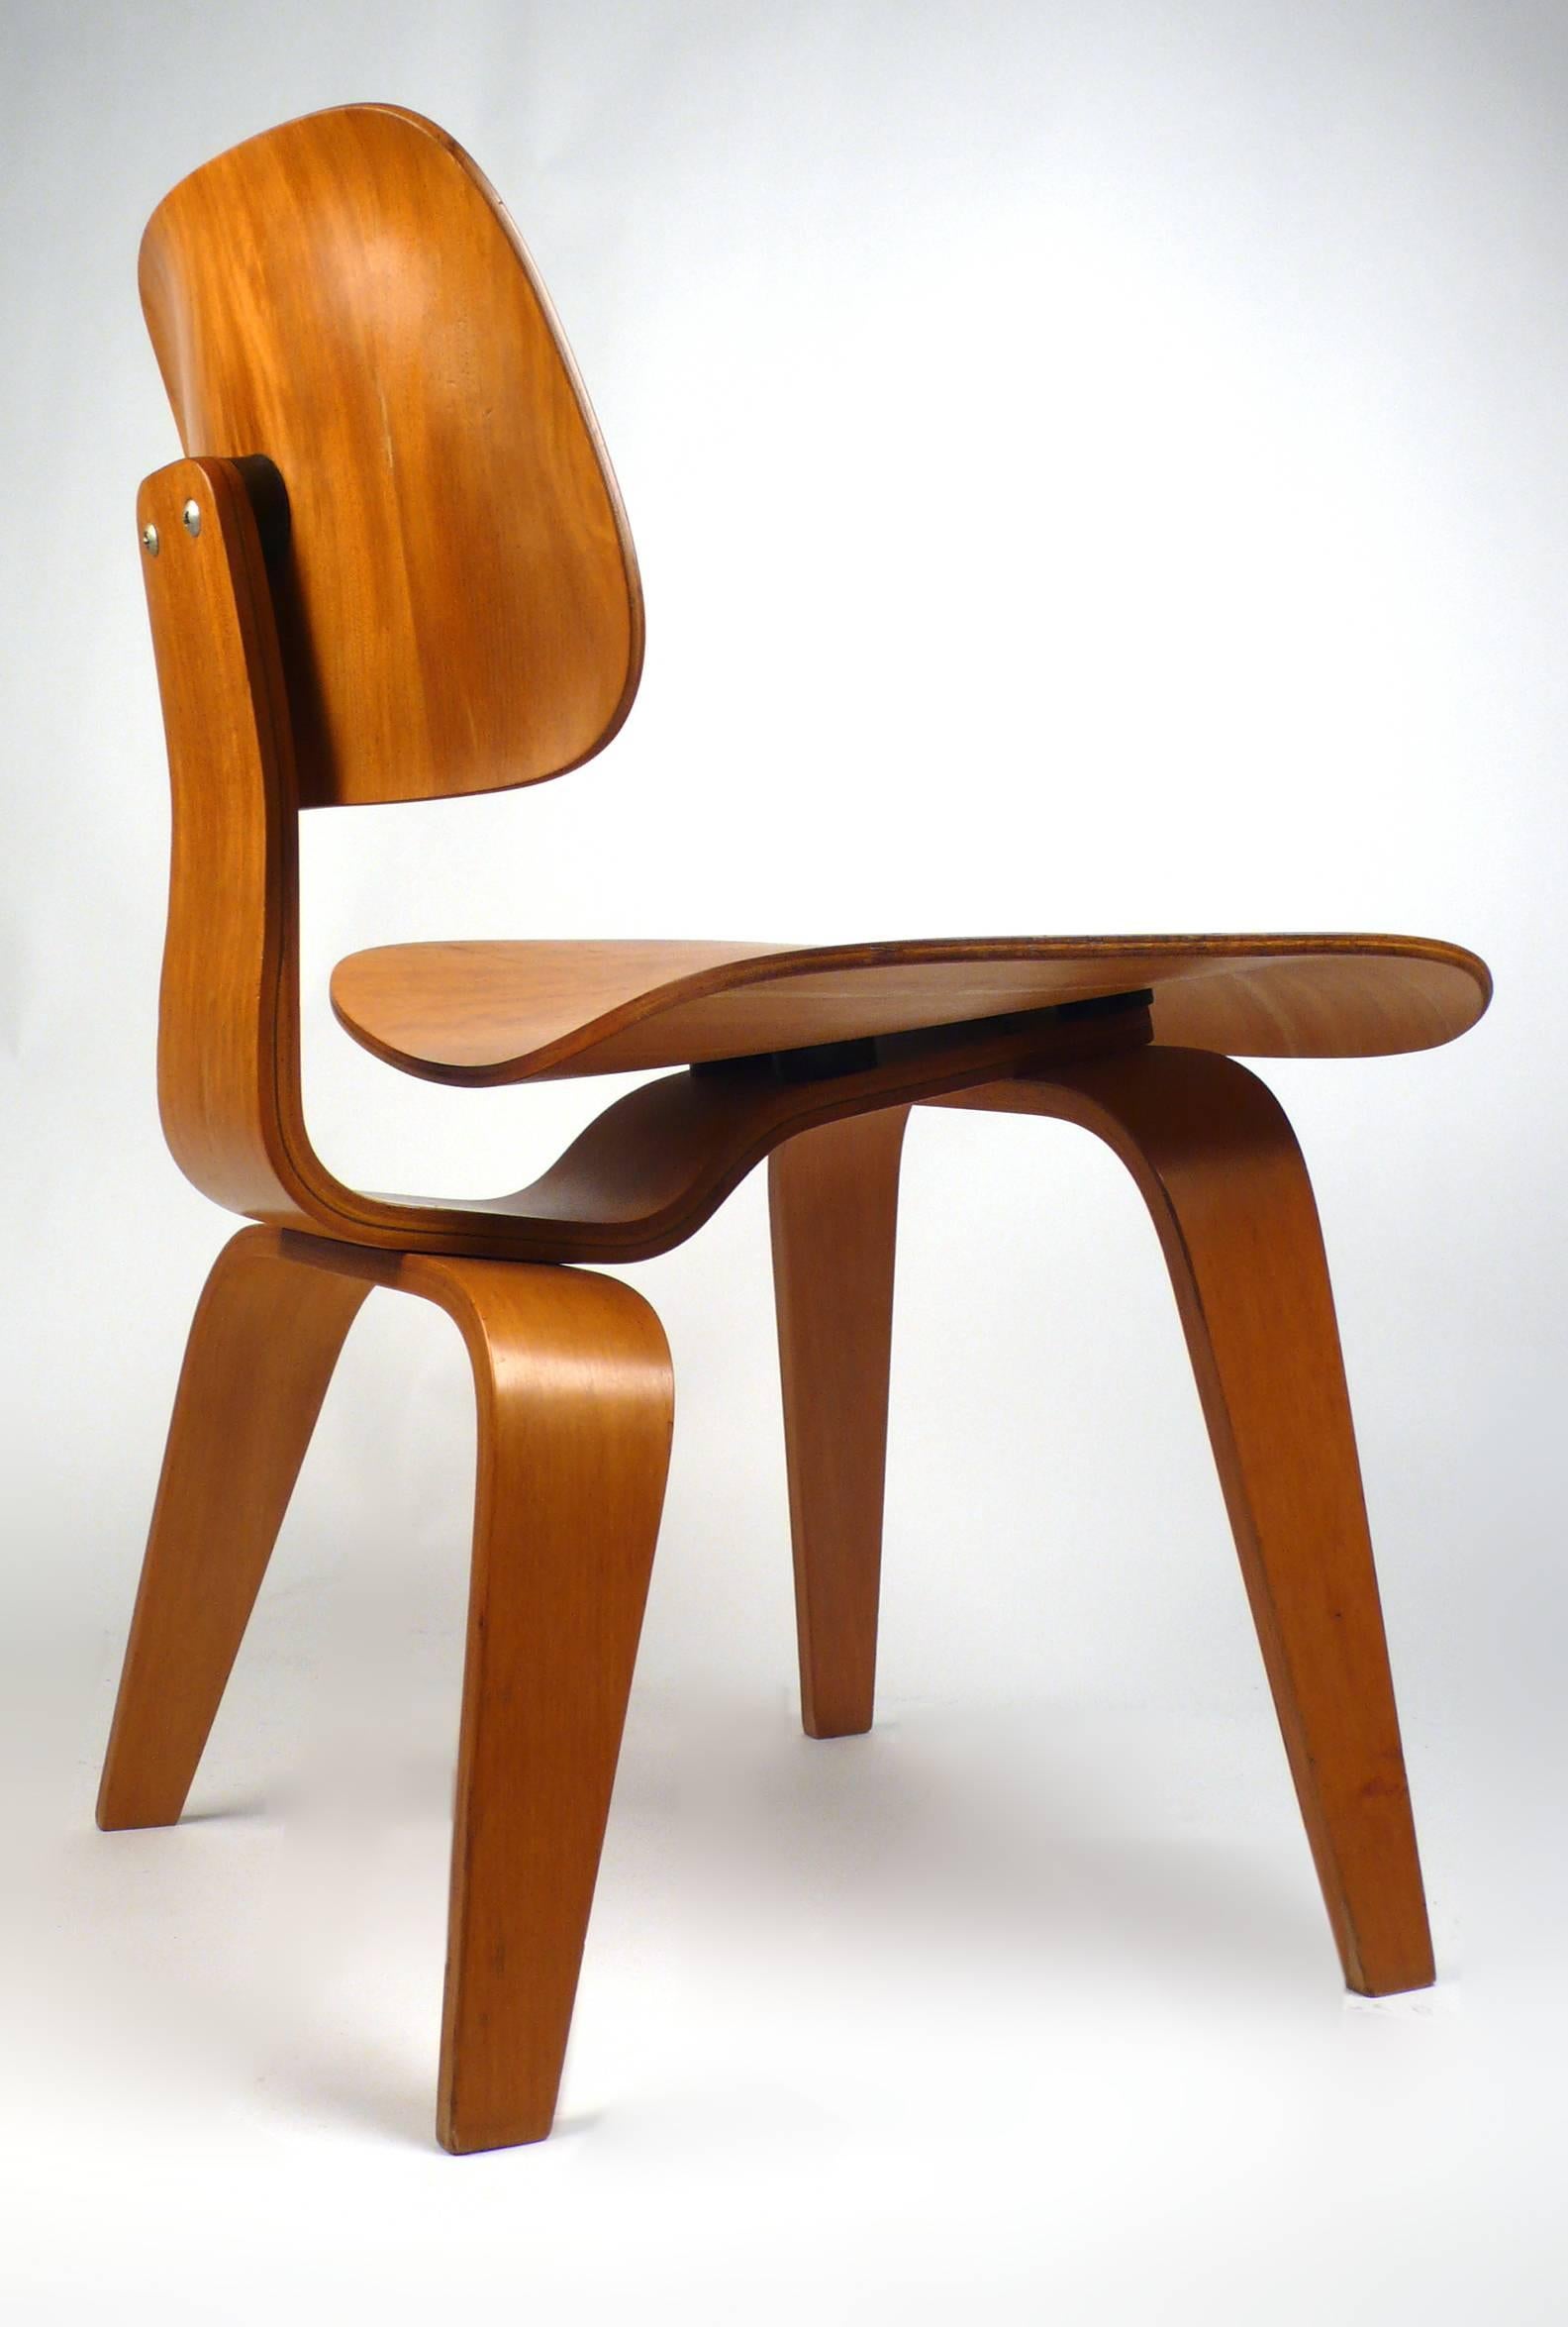 American Evans Plywood Chair DCW By Charles Eames 1940s